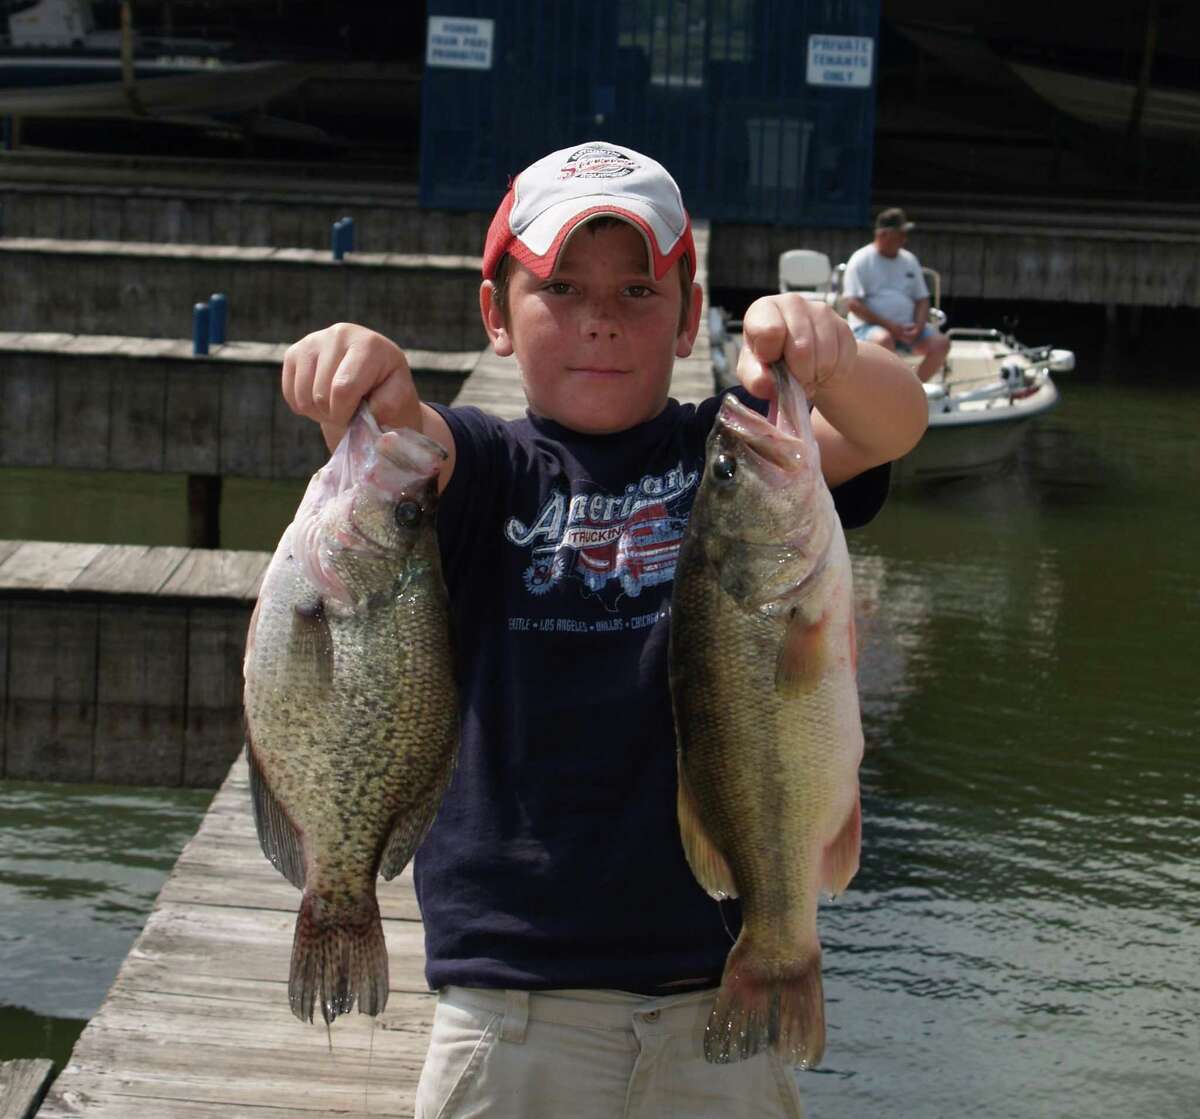 The young man that caught these nice crappie and bass will in years to come have the basis for some tall tales.